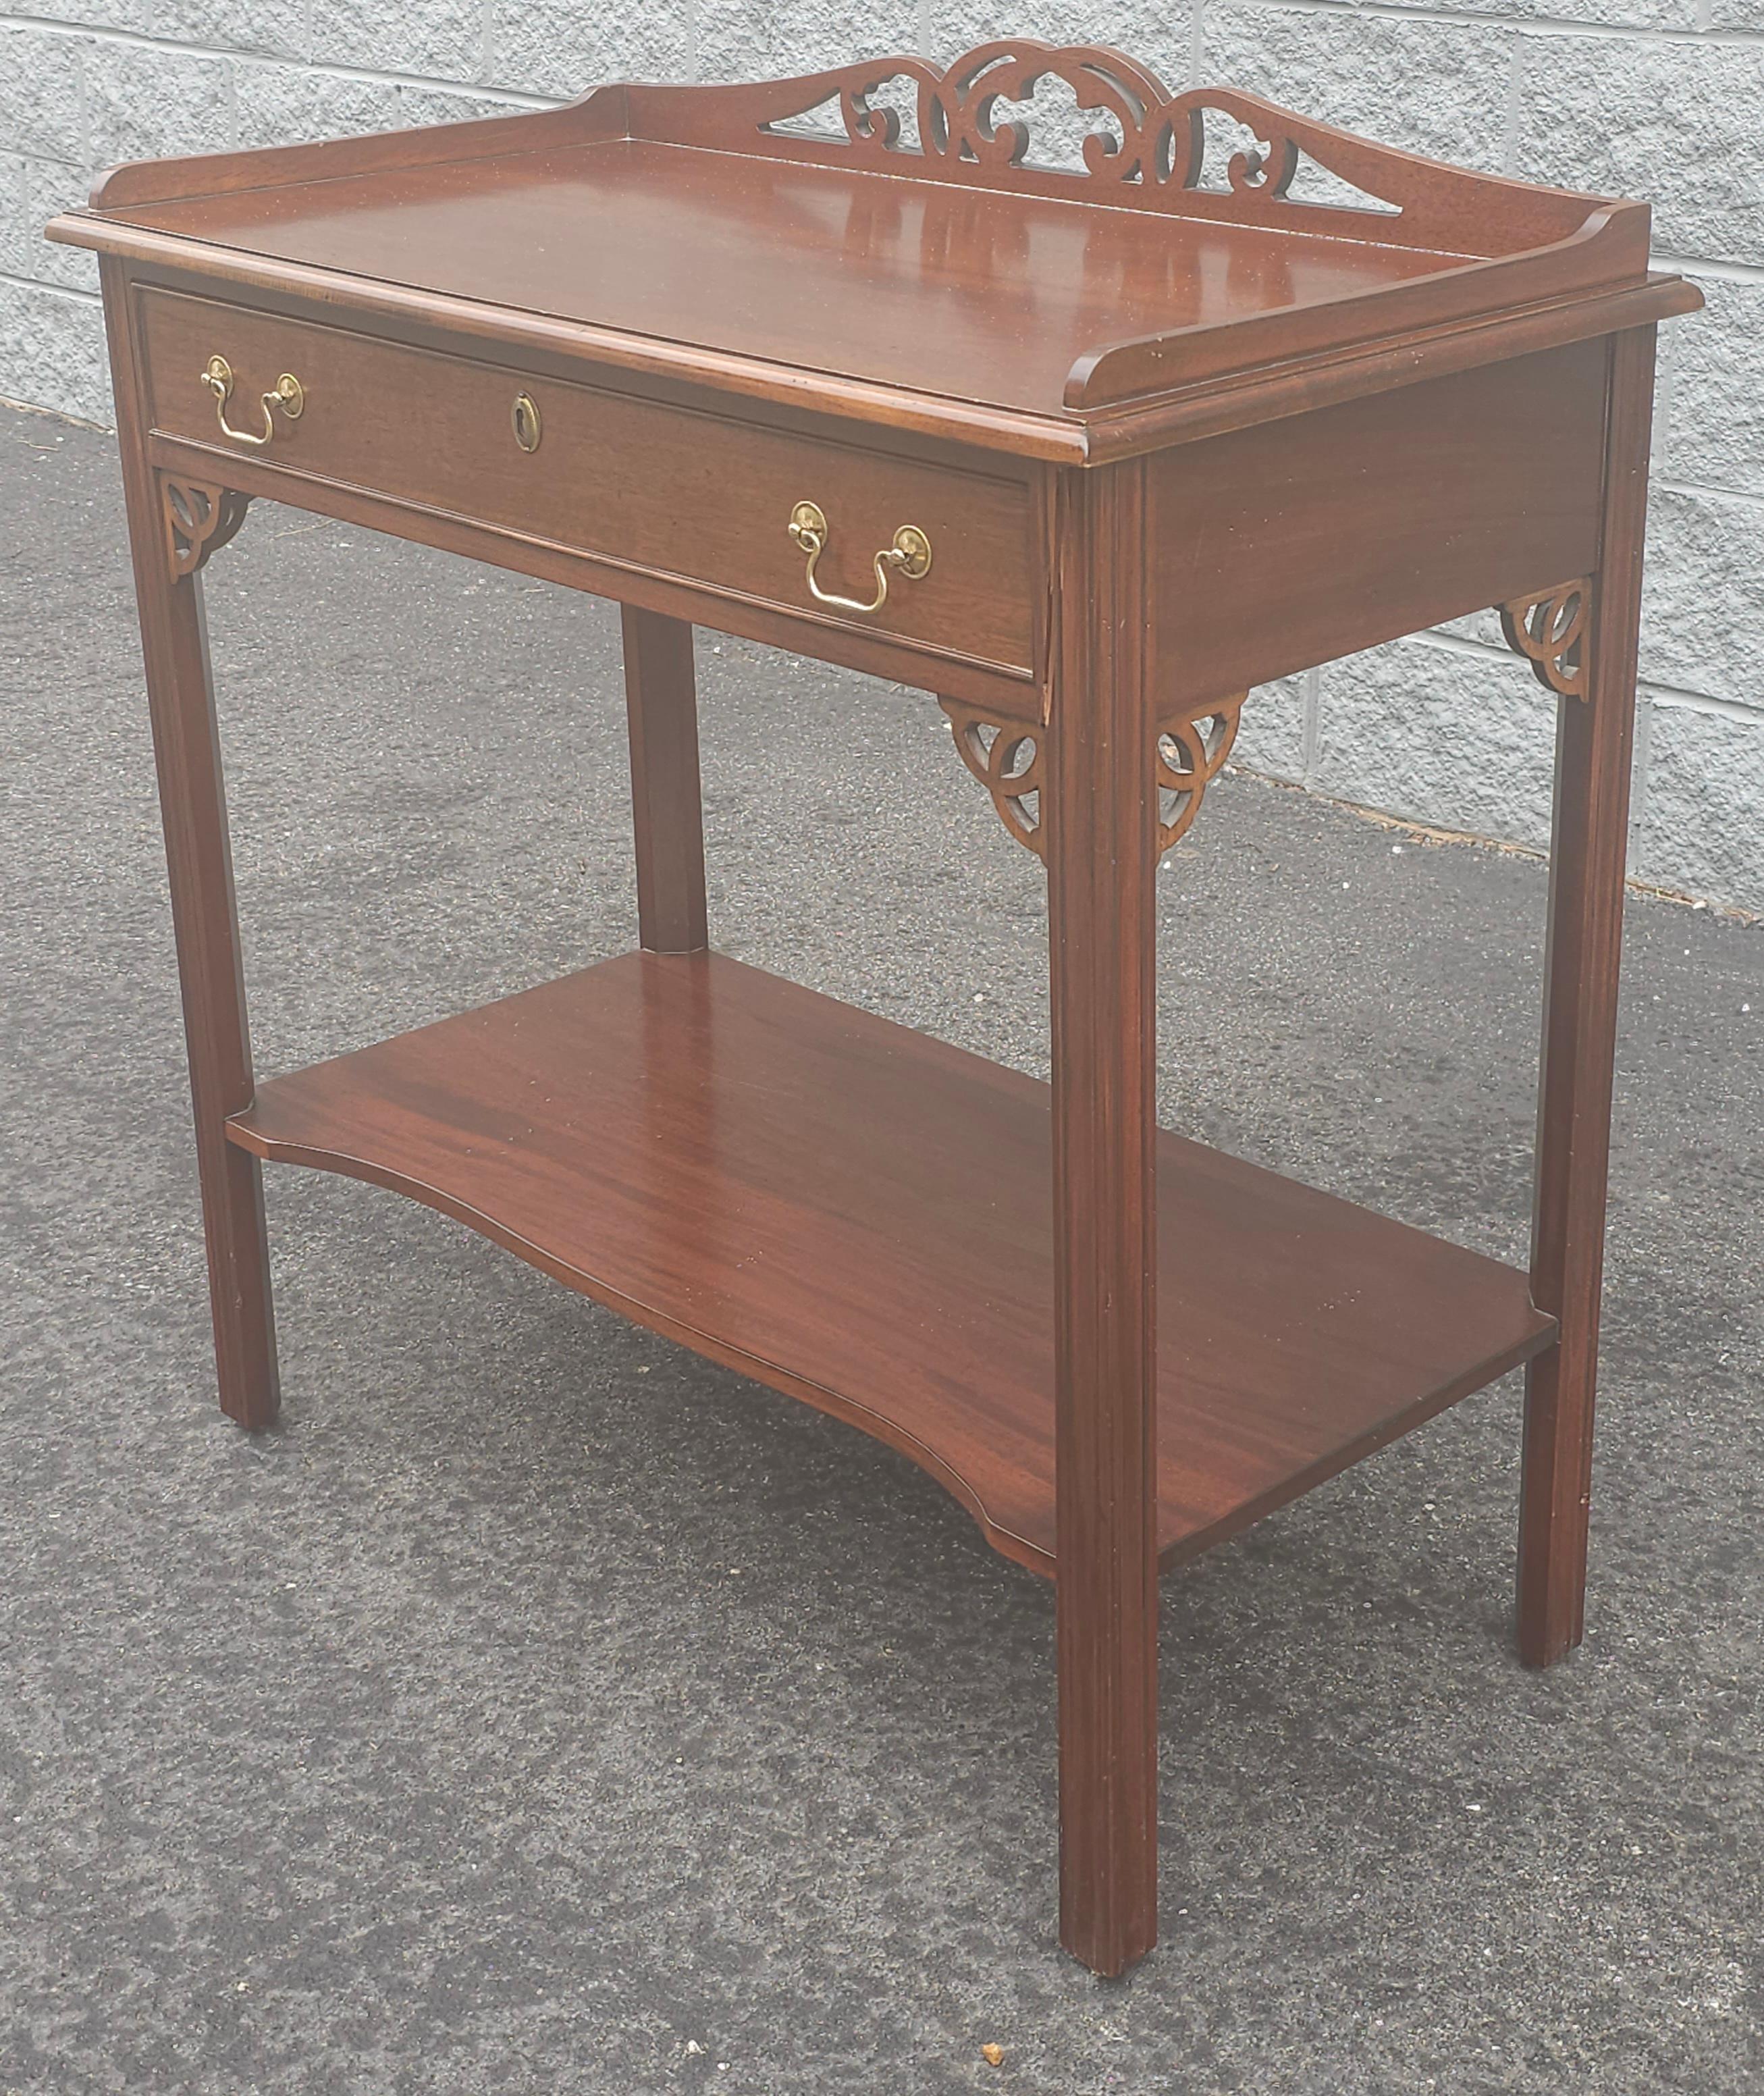 Other Early 21st Century Chippendale Mahogany Server  / Drybar For Sale